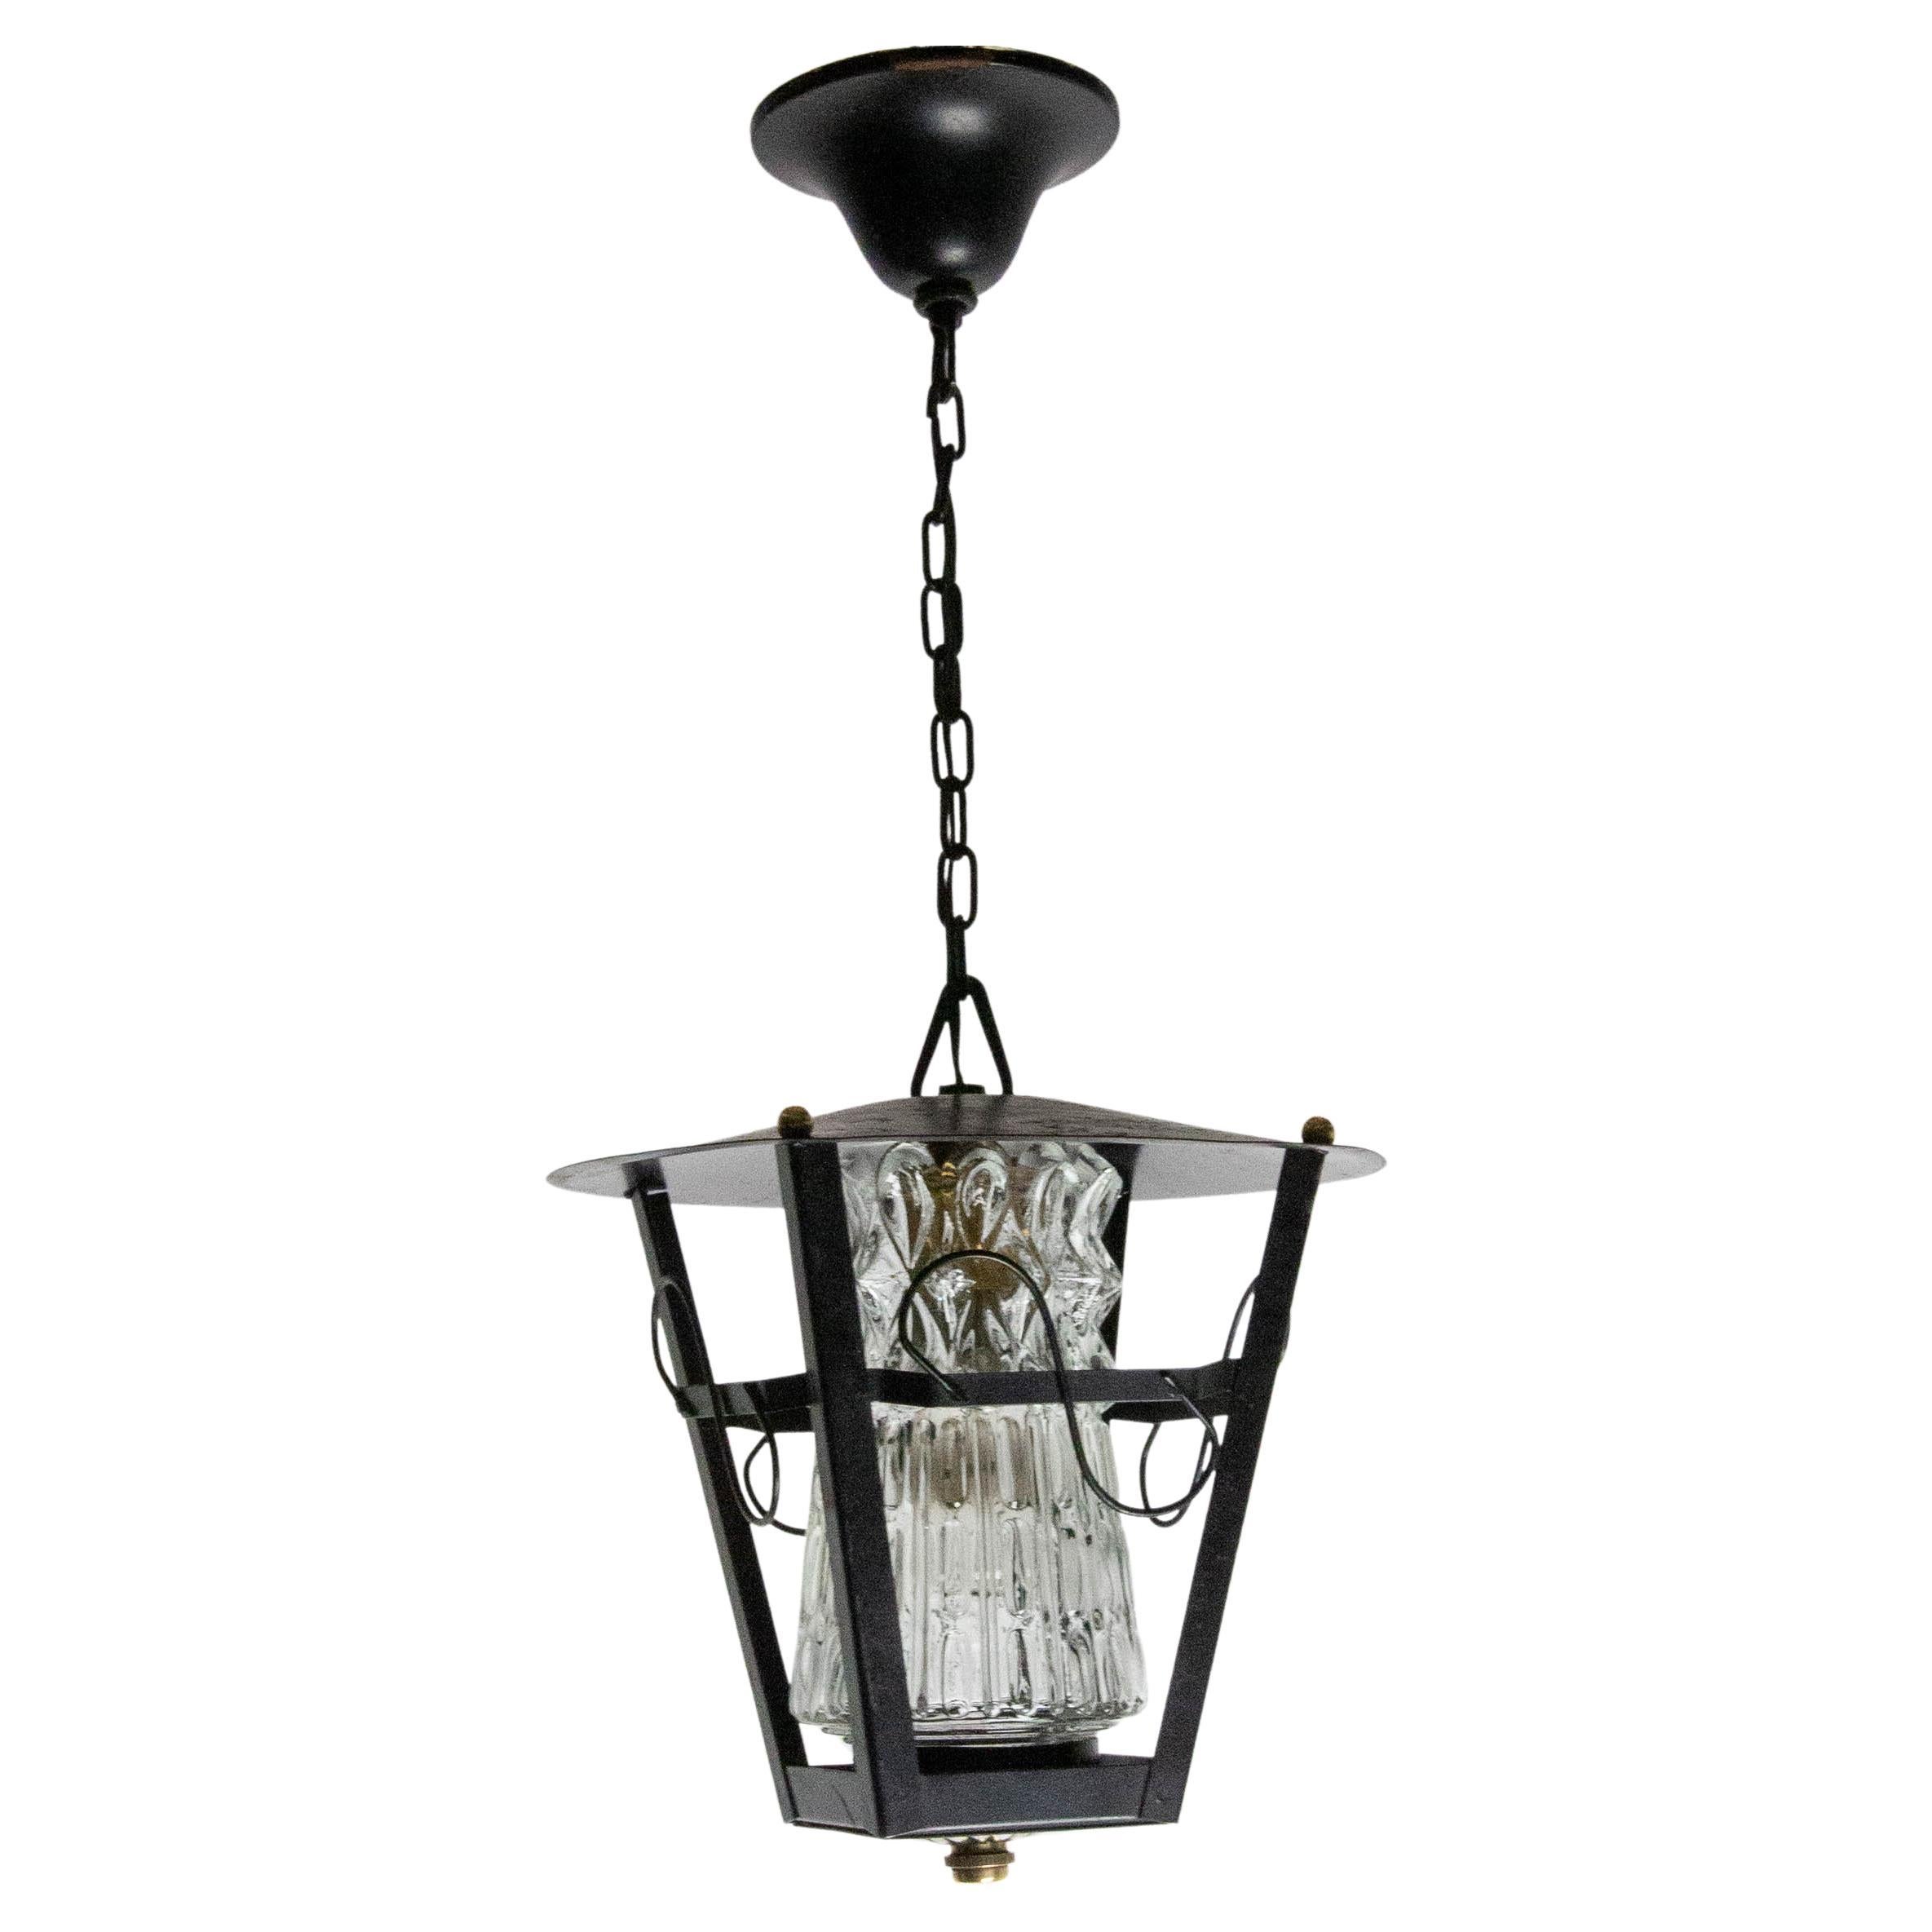 Iron and Glass Ceiling Lamp Lustre French Lantern, circa 1960